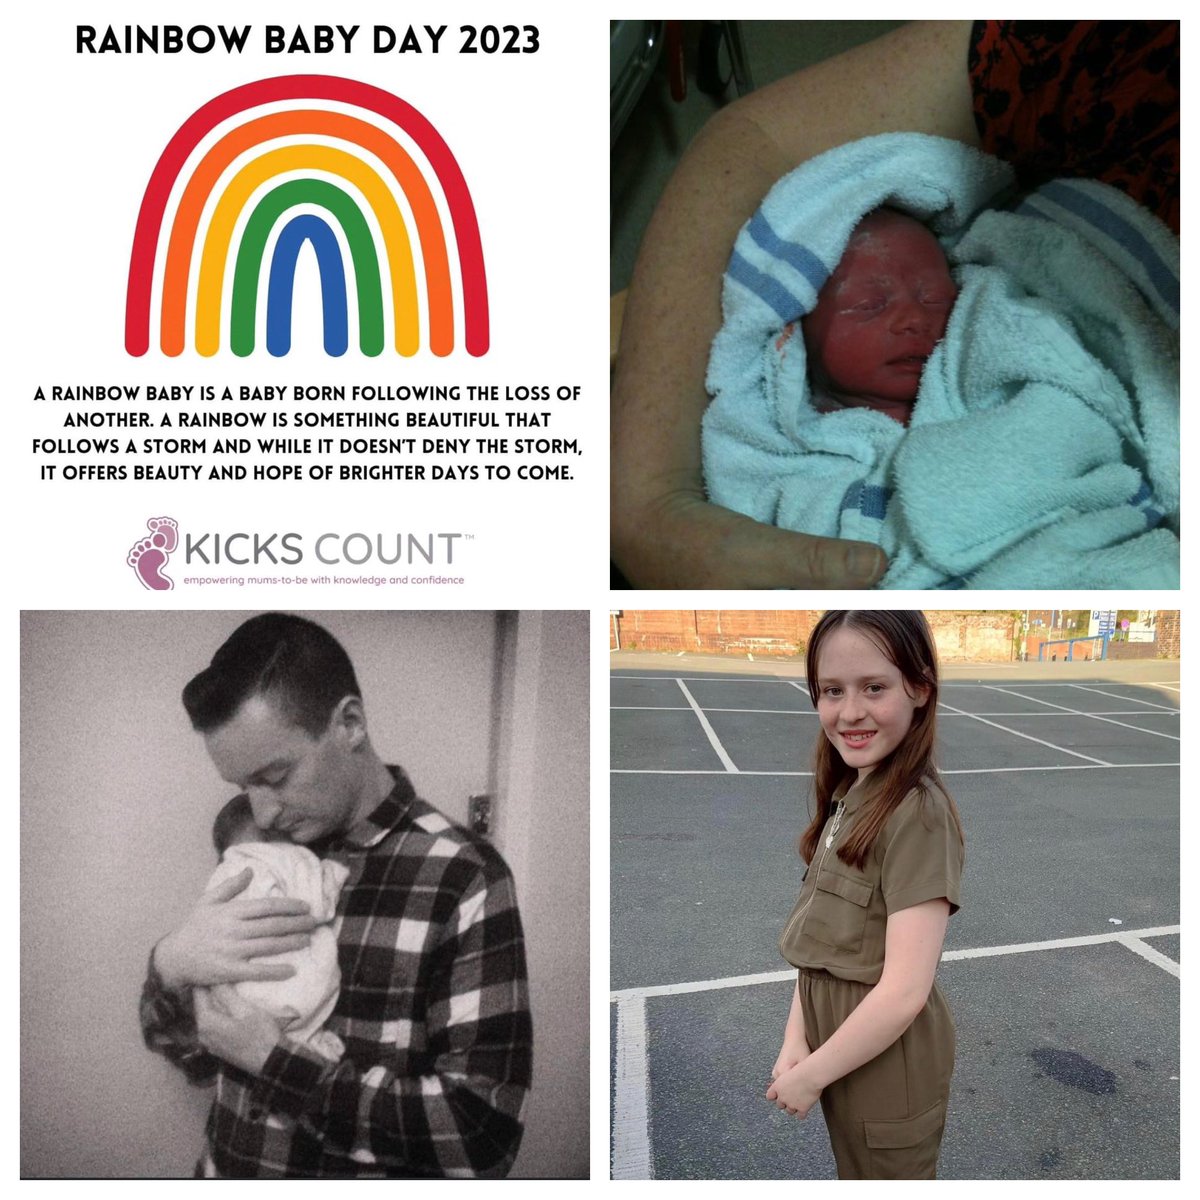 Today is #RainbowBabyDay - we lost our little 🎃 after 7 weeks early 2012. One of the hardest things we went through as a couple. We loved, we cried, we laughed, we supported each other - we got through the pain. However our Rainbow Baby, Lucy - came on Christmas Day 2012 ❤️